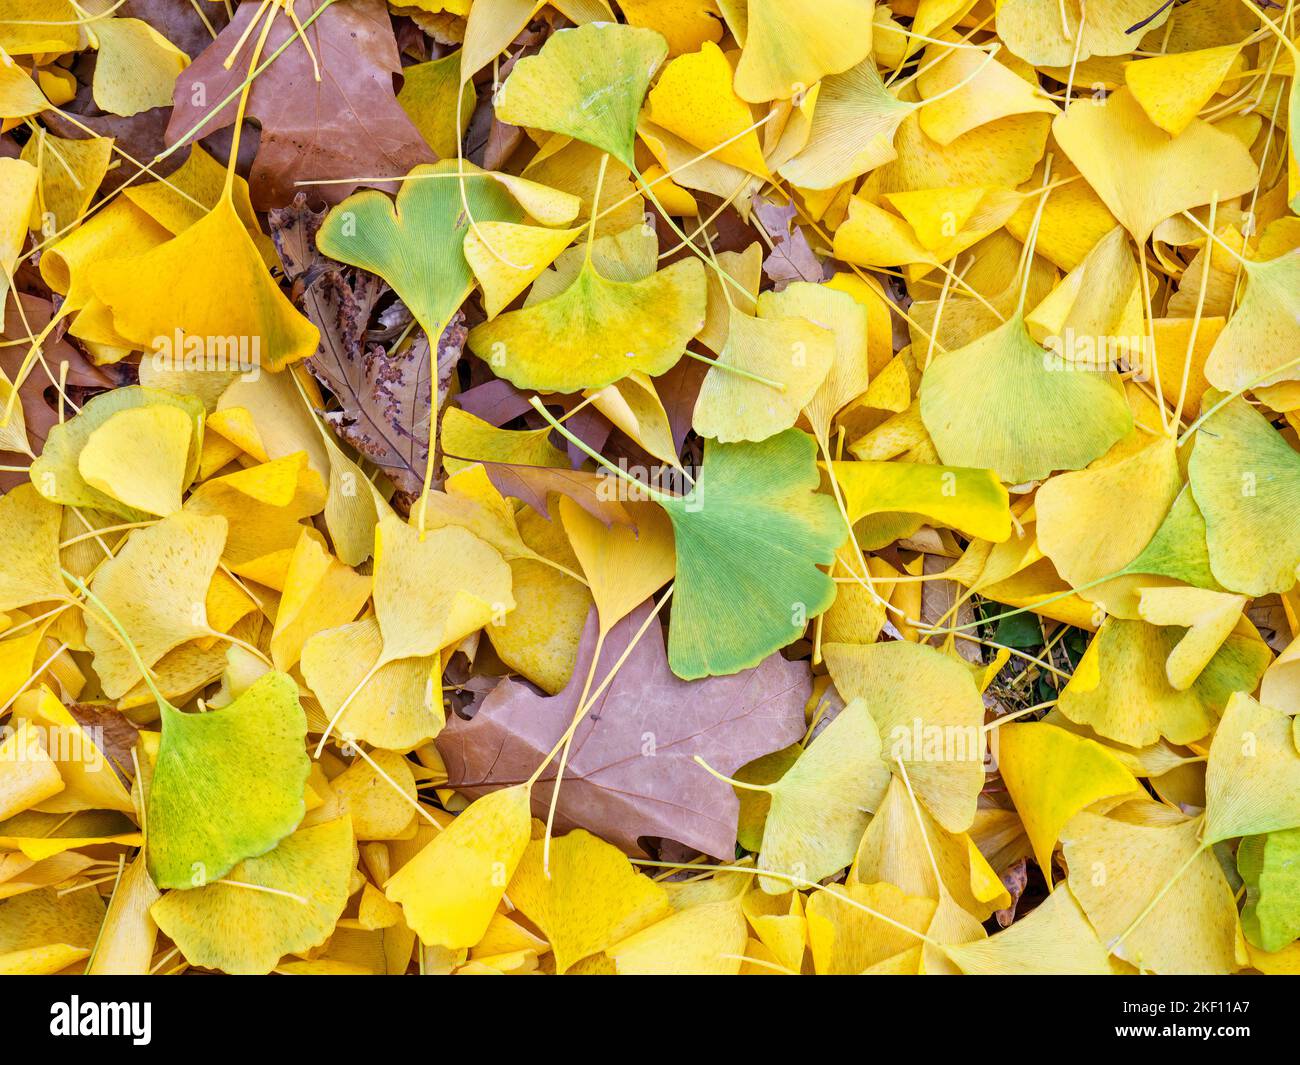 Oak leaves among Ginkgo leaves on ground in autumn. Stock Photo